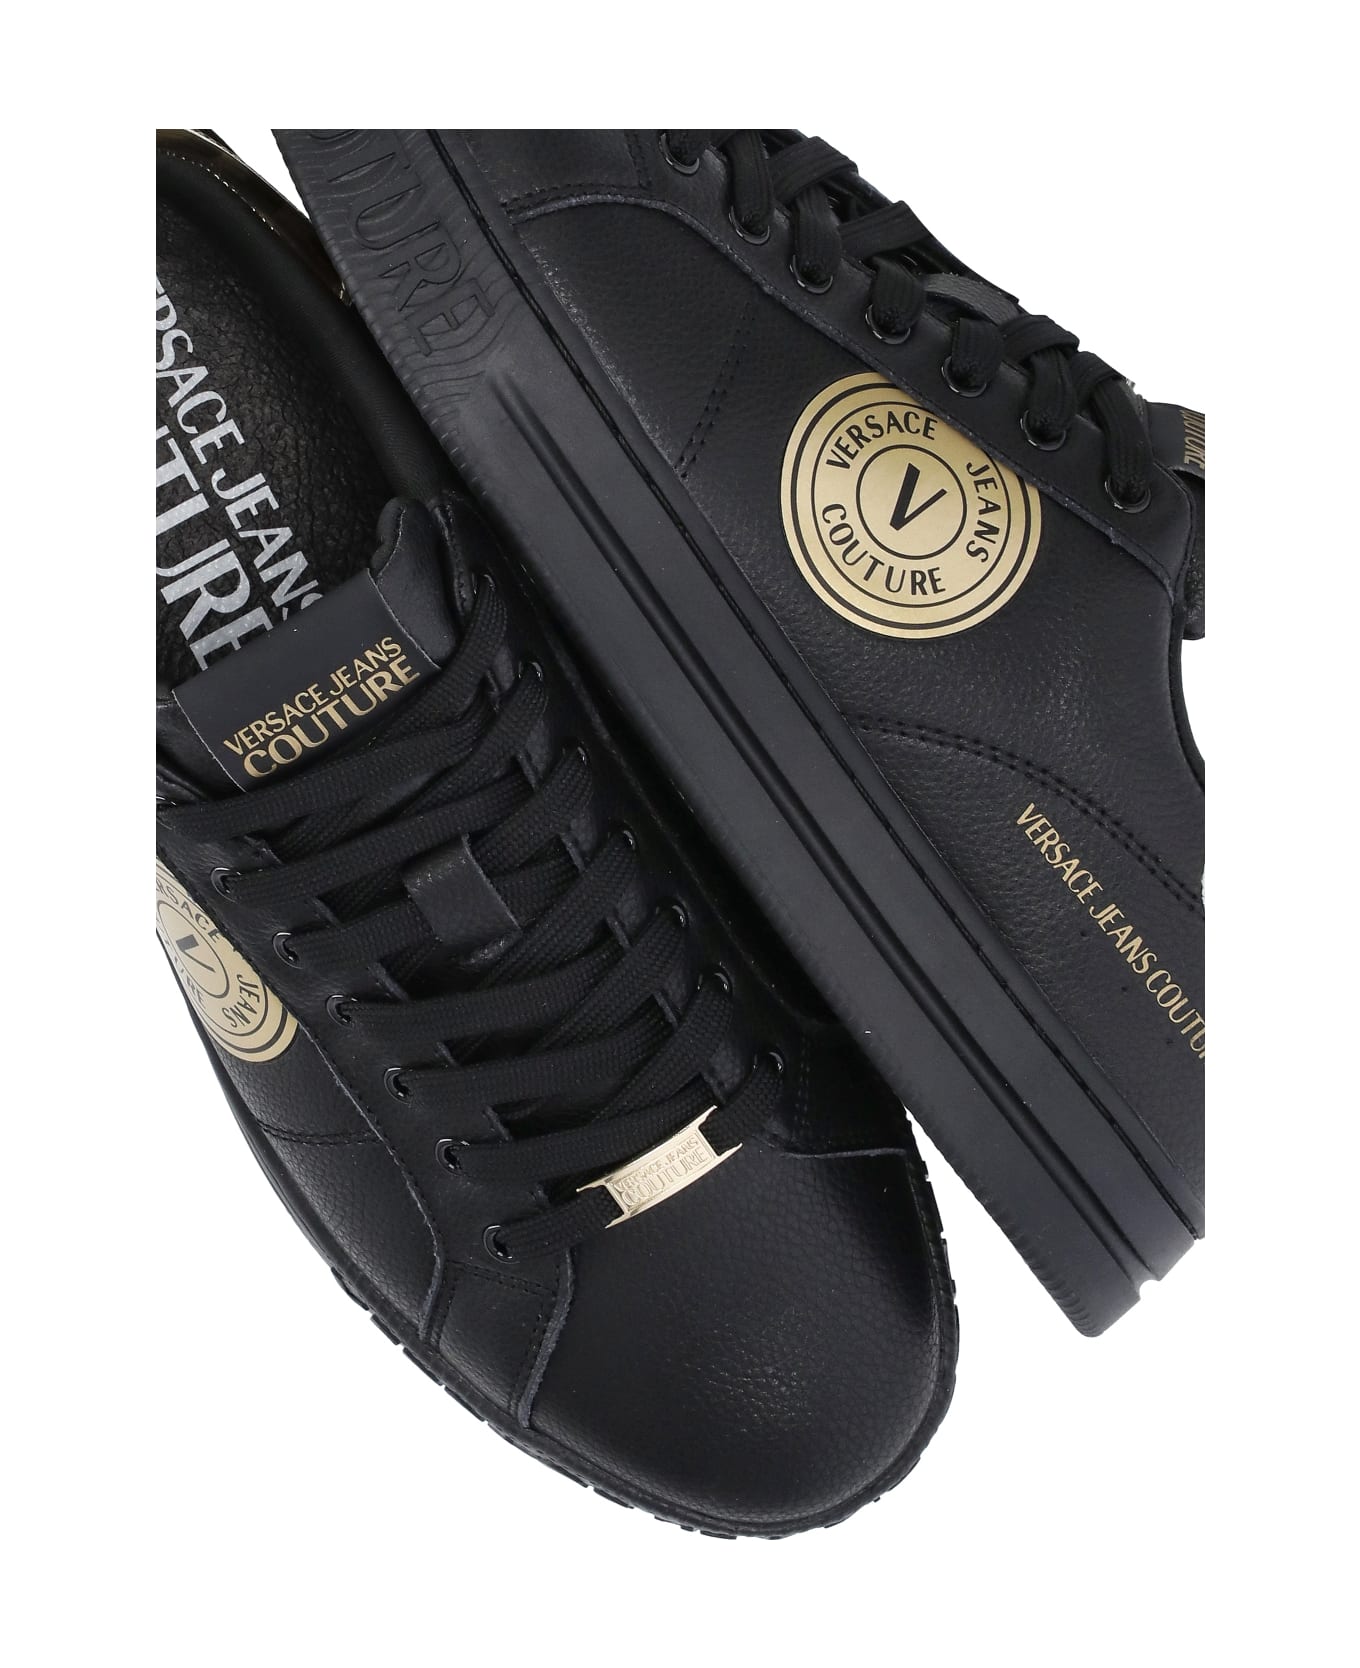 Versace Jeans Couture Court 88 Sneakers - Black スニーカー